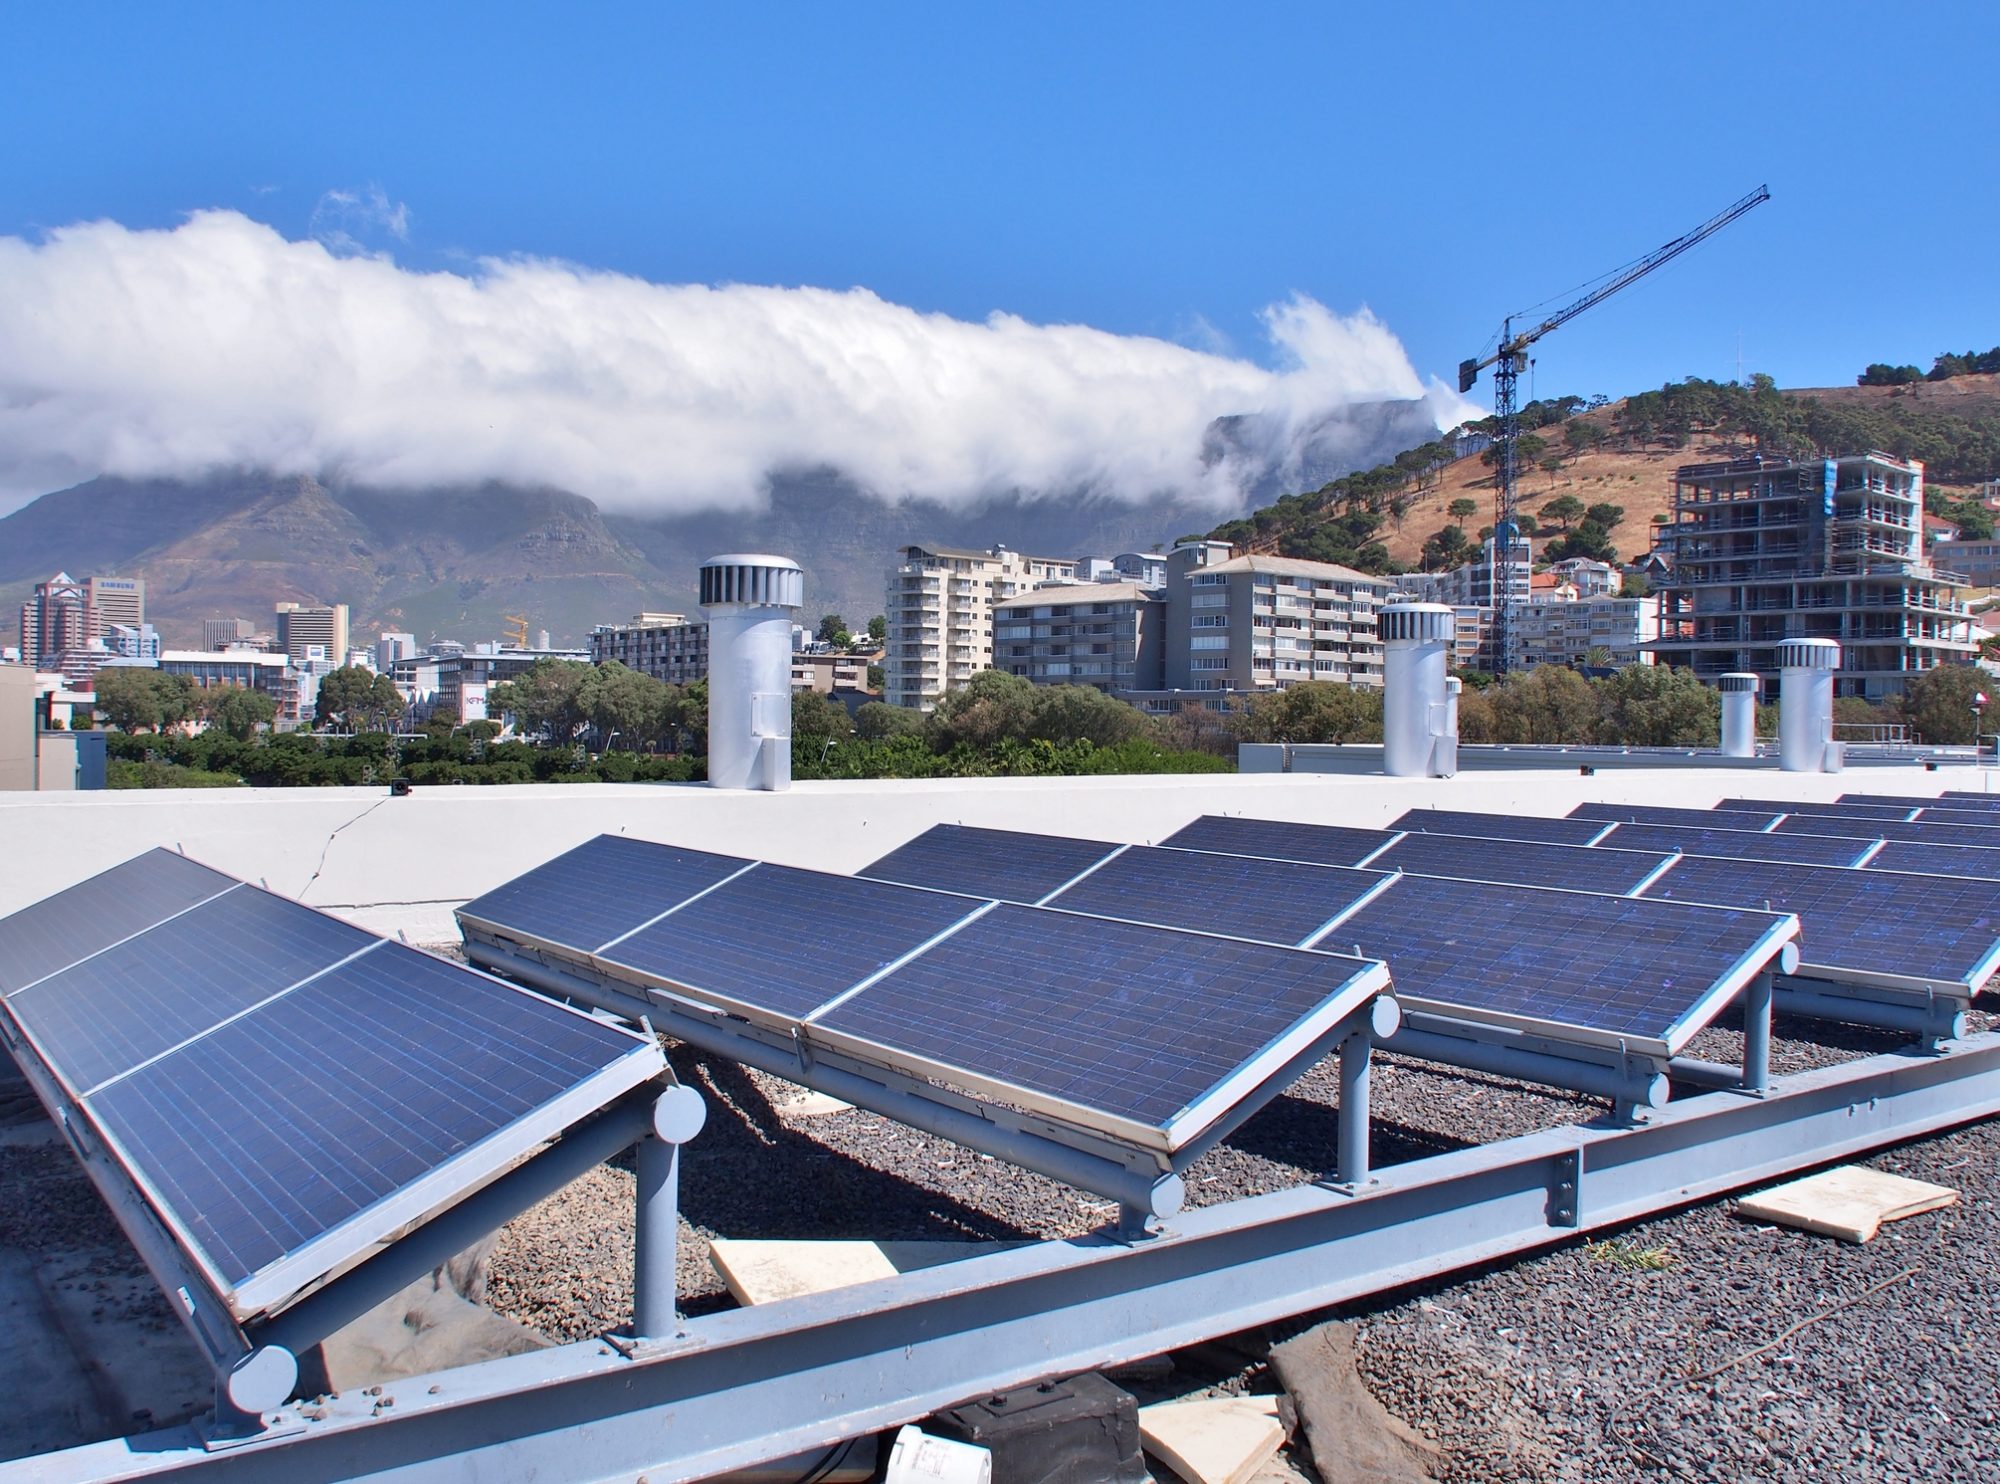 Solar panels or Solar cells on rooftop or terrace of building in Cape Town, South Africa. Can saving energy. Green or Sun or renewable or Clean energy.